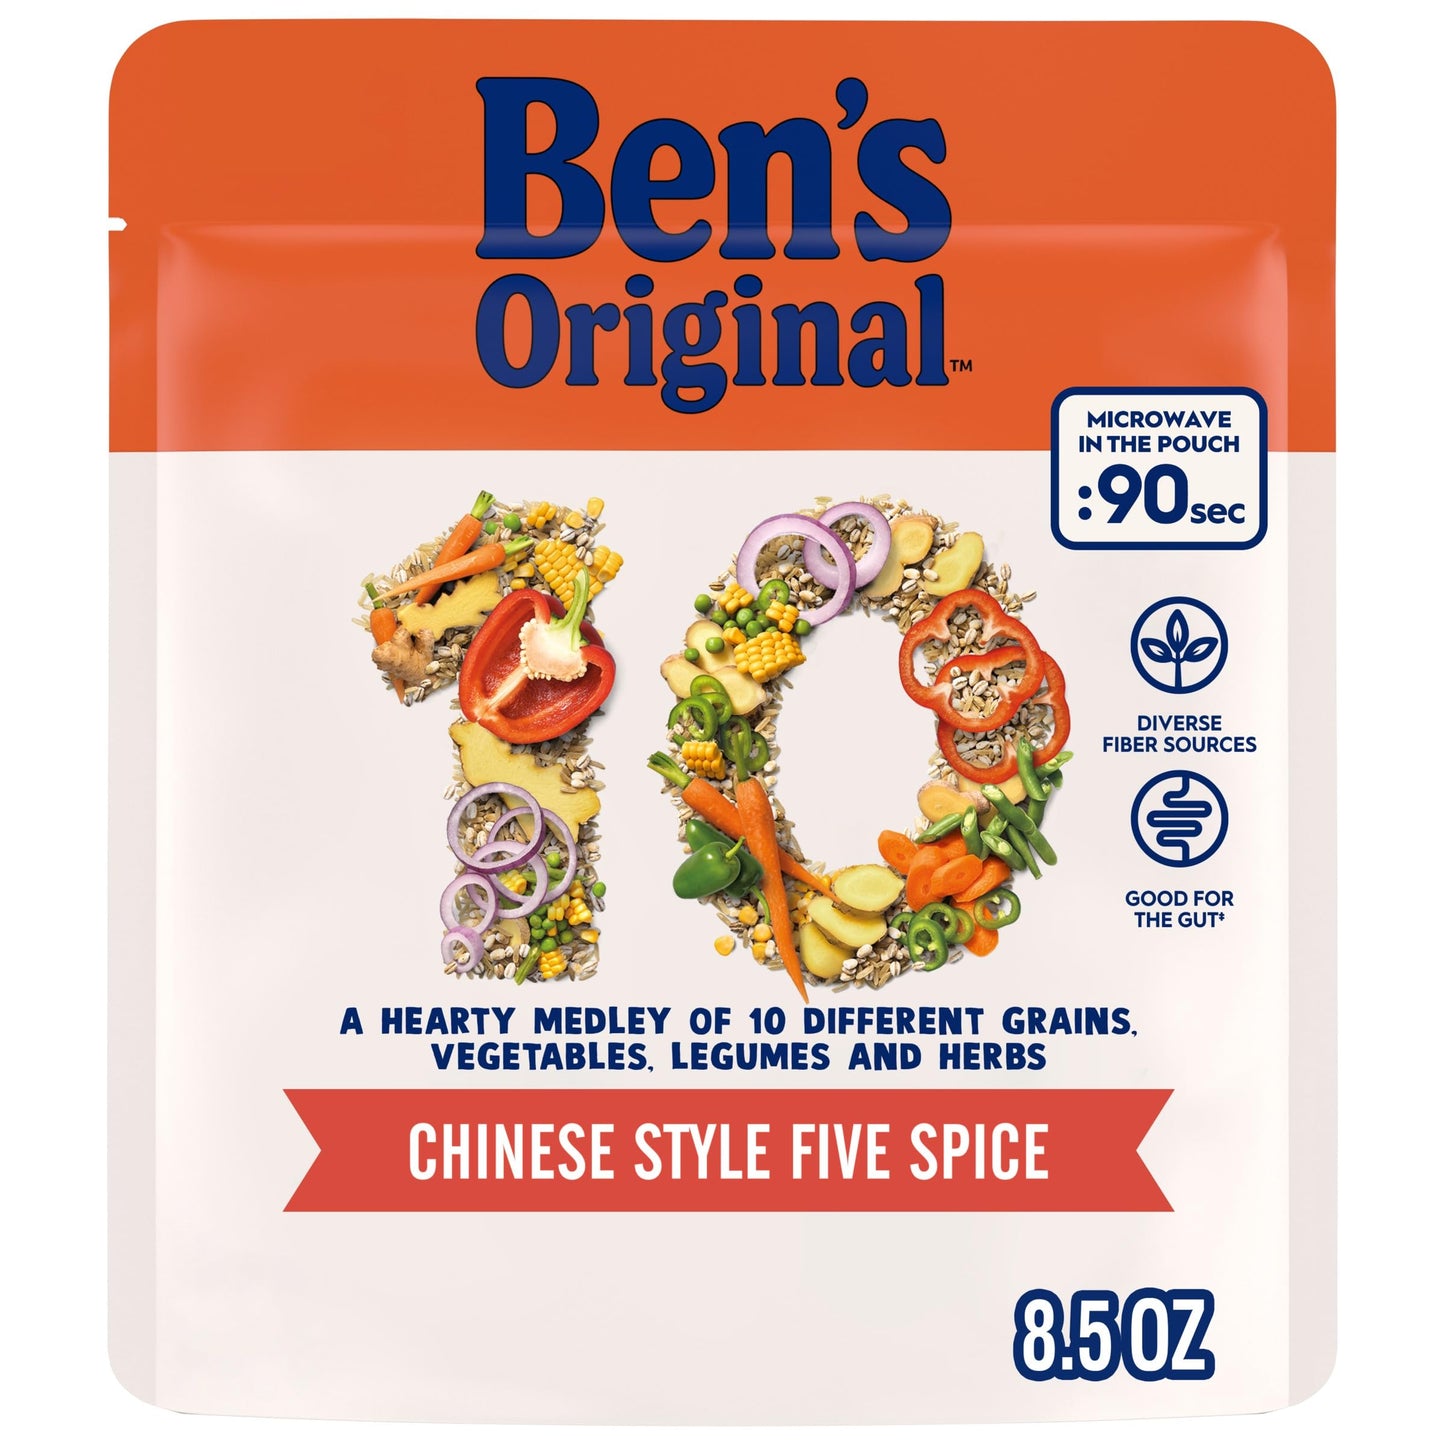 BEN'S ORIGINAL 10 MEDLEY Chinese Style Five Spice, Hearty Medley of Grains, Vegetables, Legumes and Herbs, Side Dish, 8.5 OZ Pouch